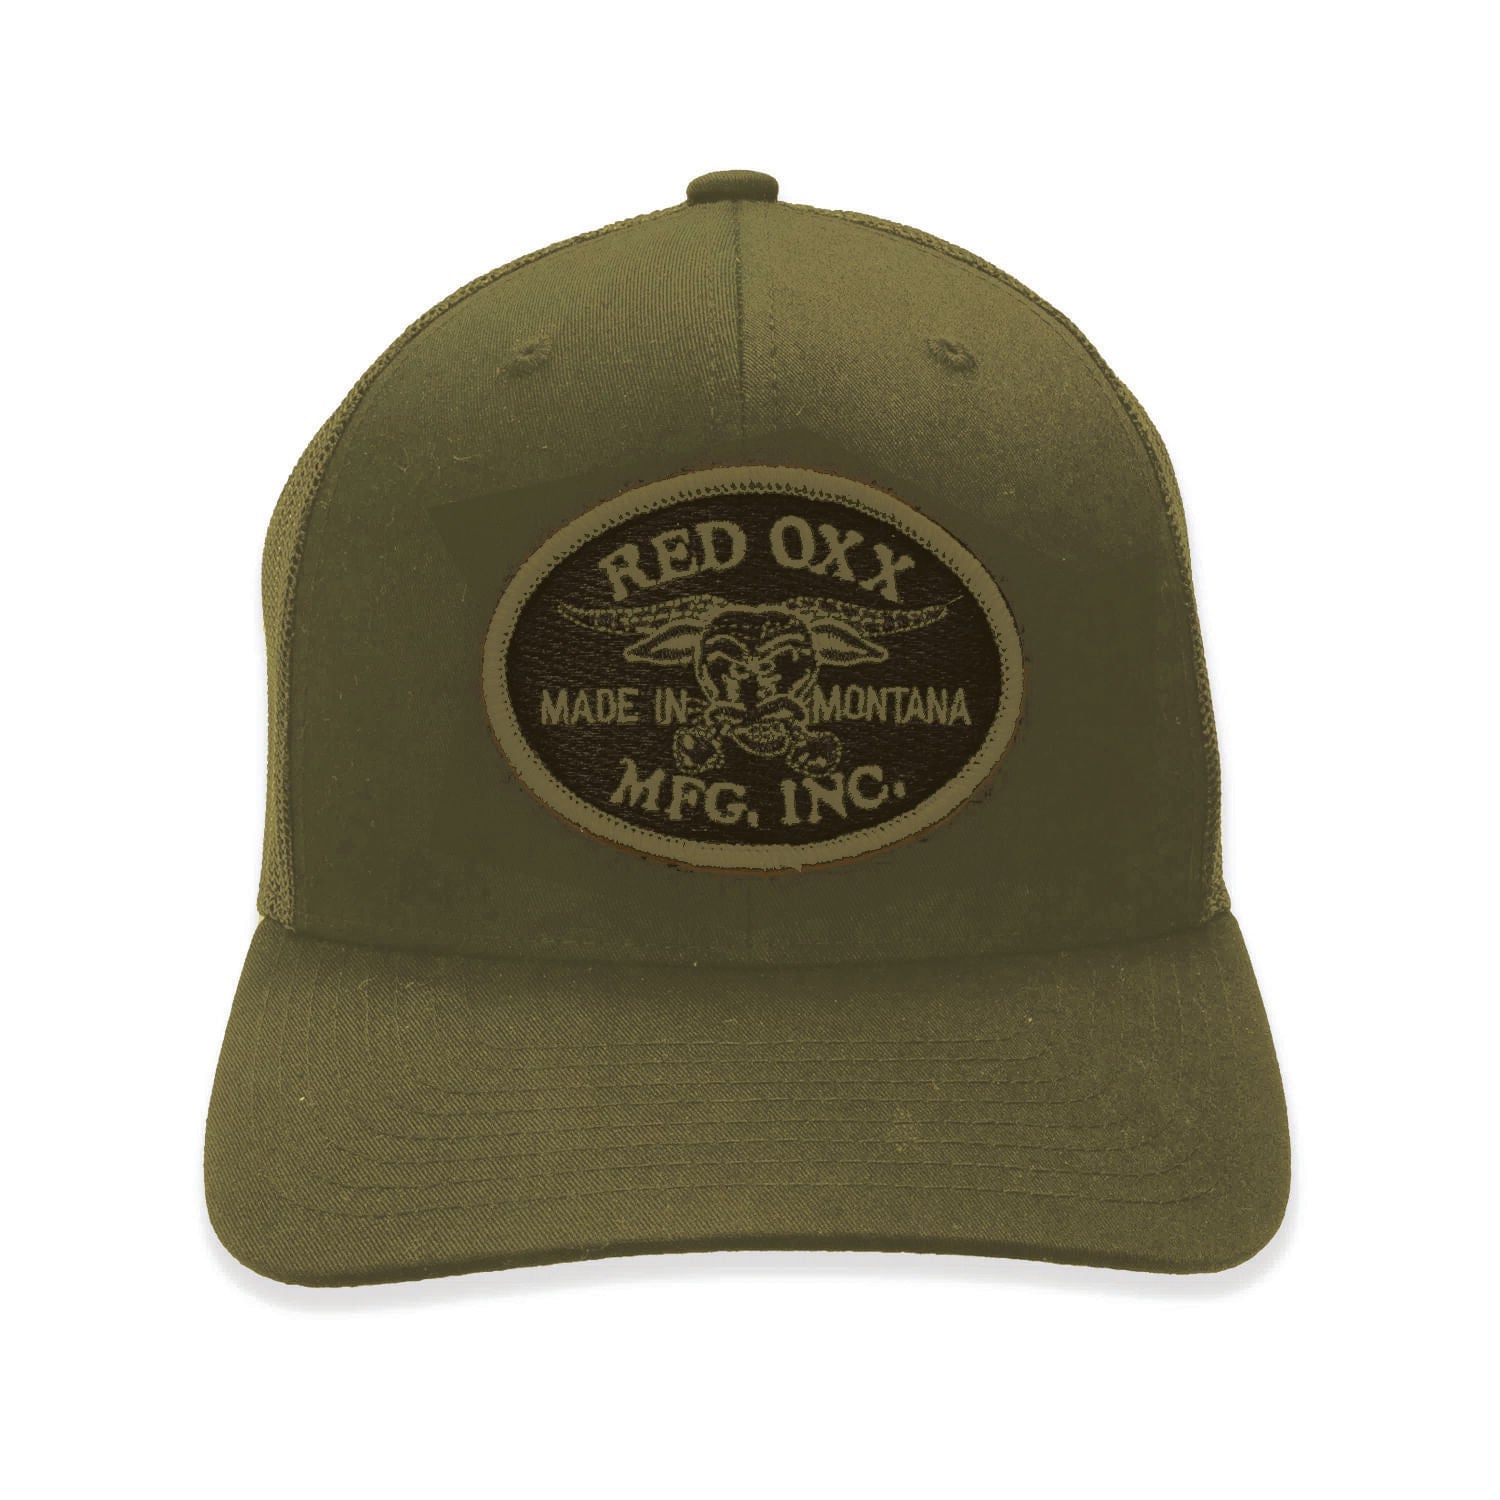 Red Oxx green patch logo hat. 